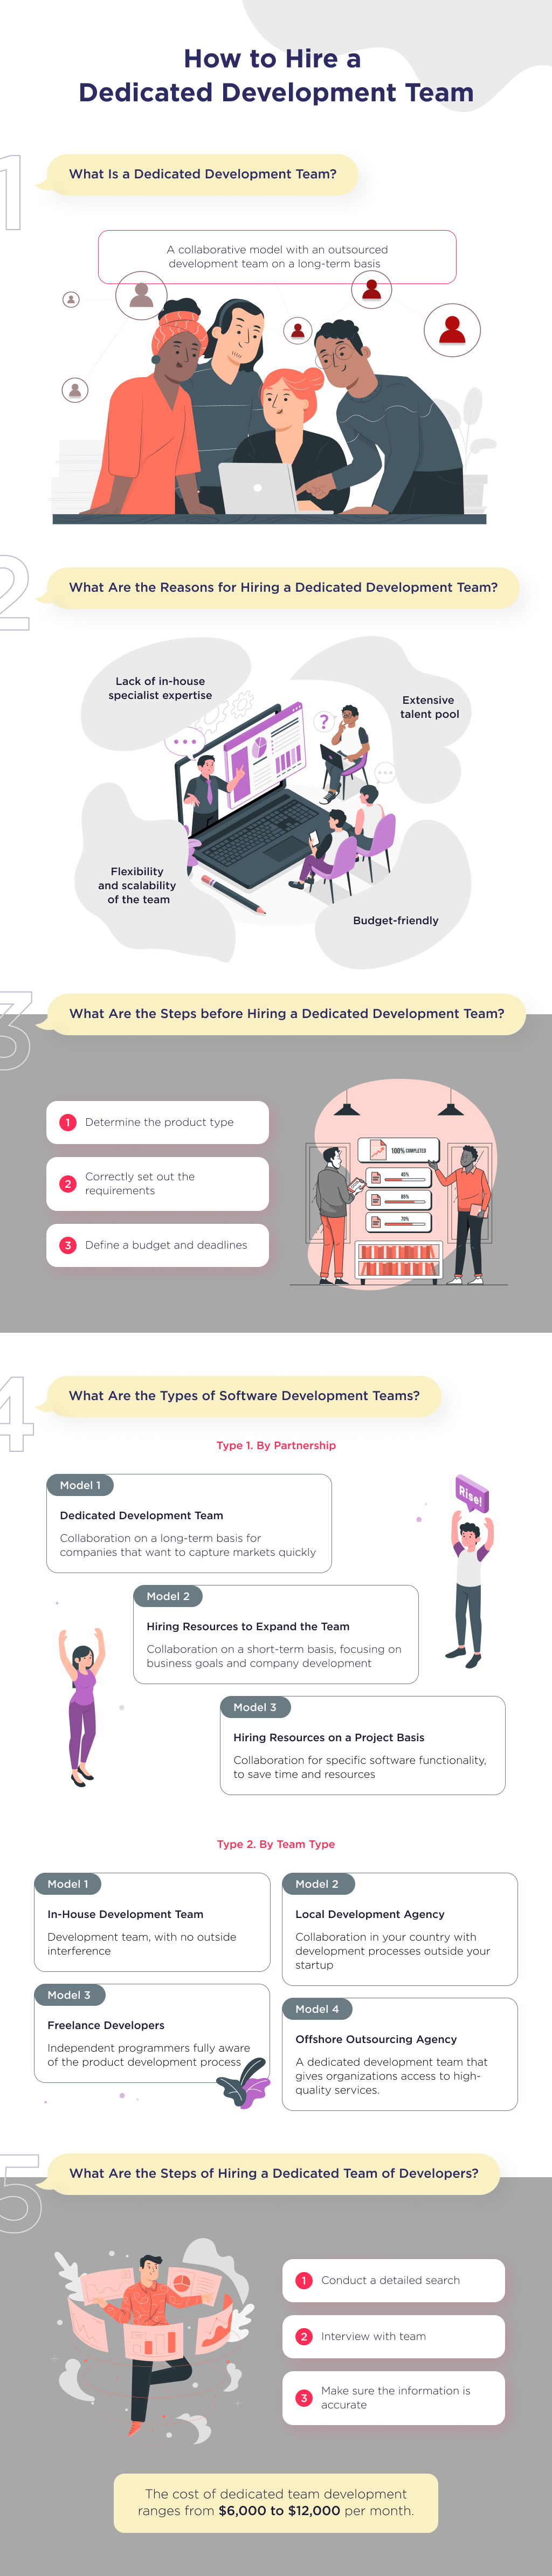 This infographic shows the basic steps you should take to hire a dedicated development team